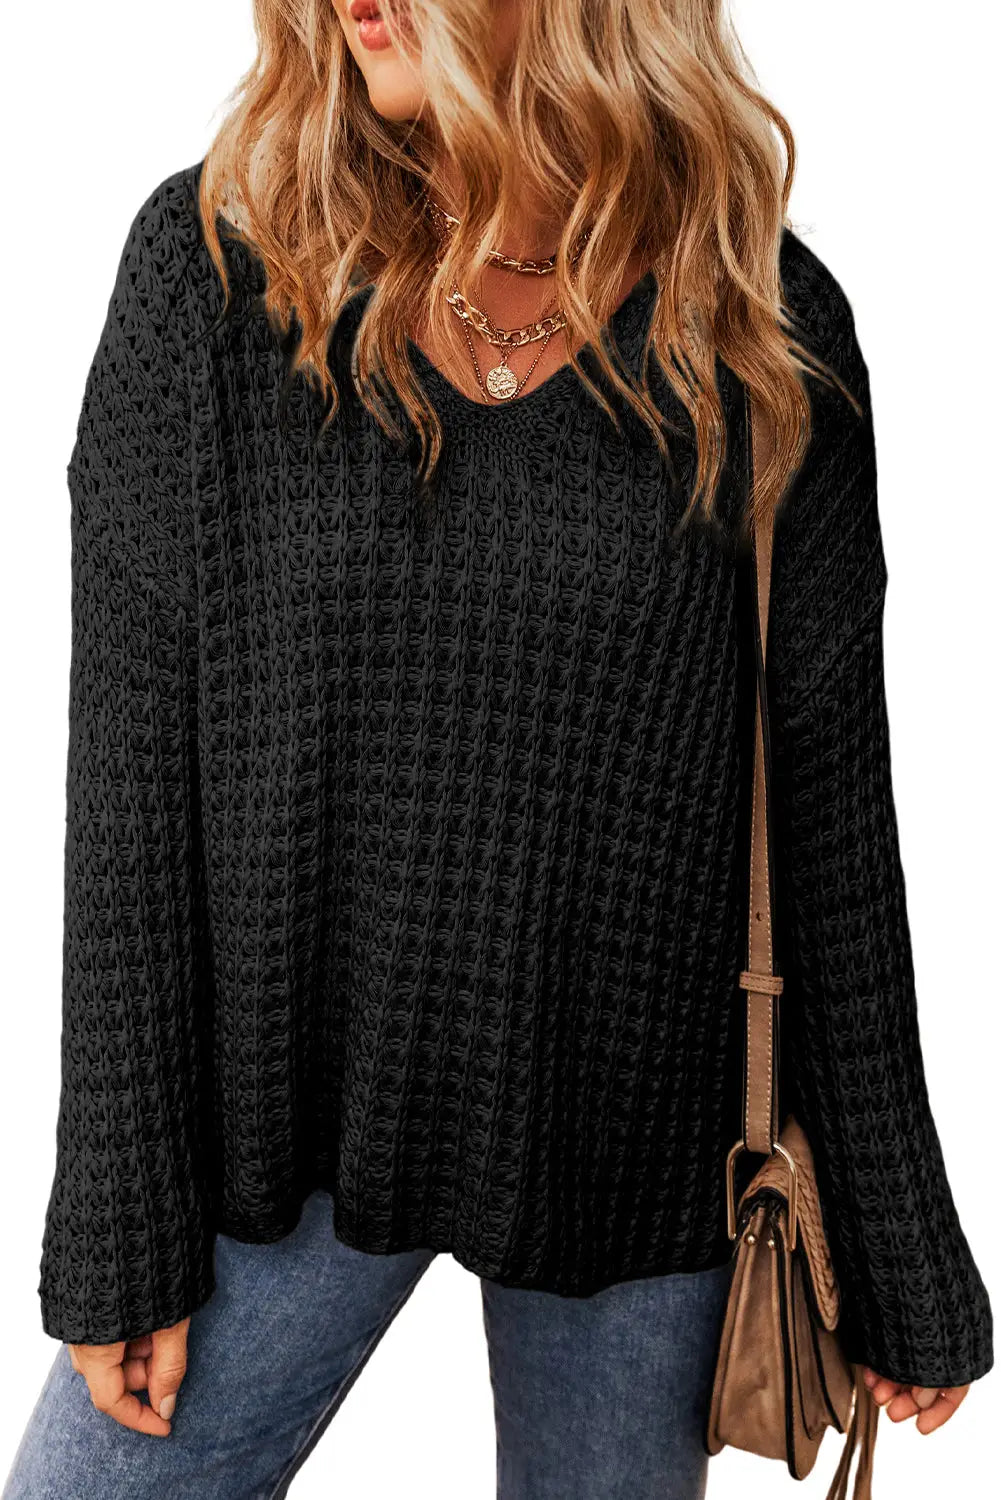 Black hollow-out crochet v neck sweater - sweaters & cardigans